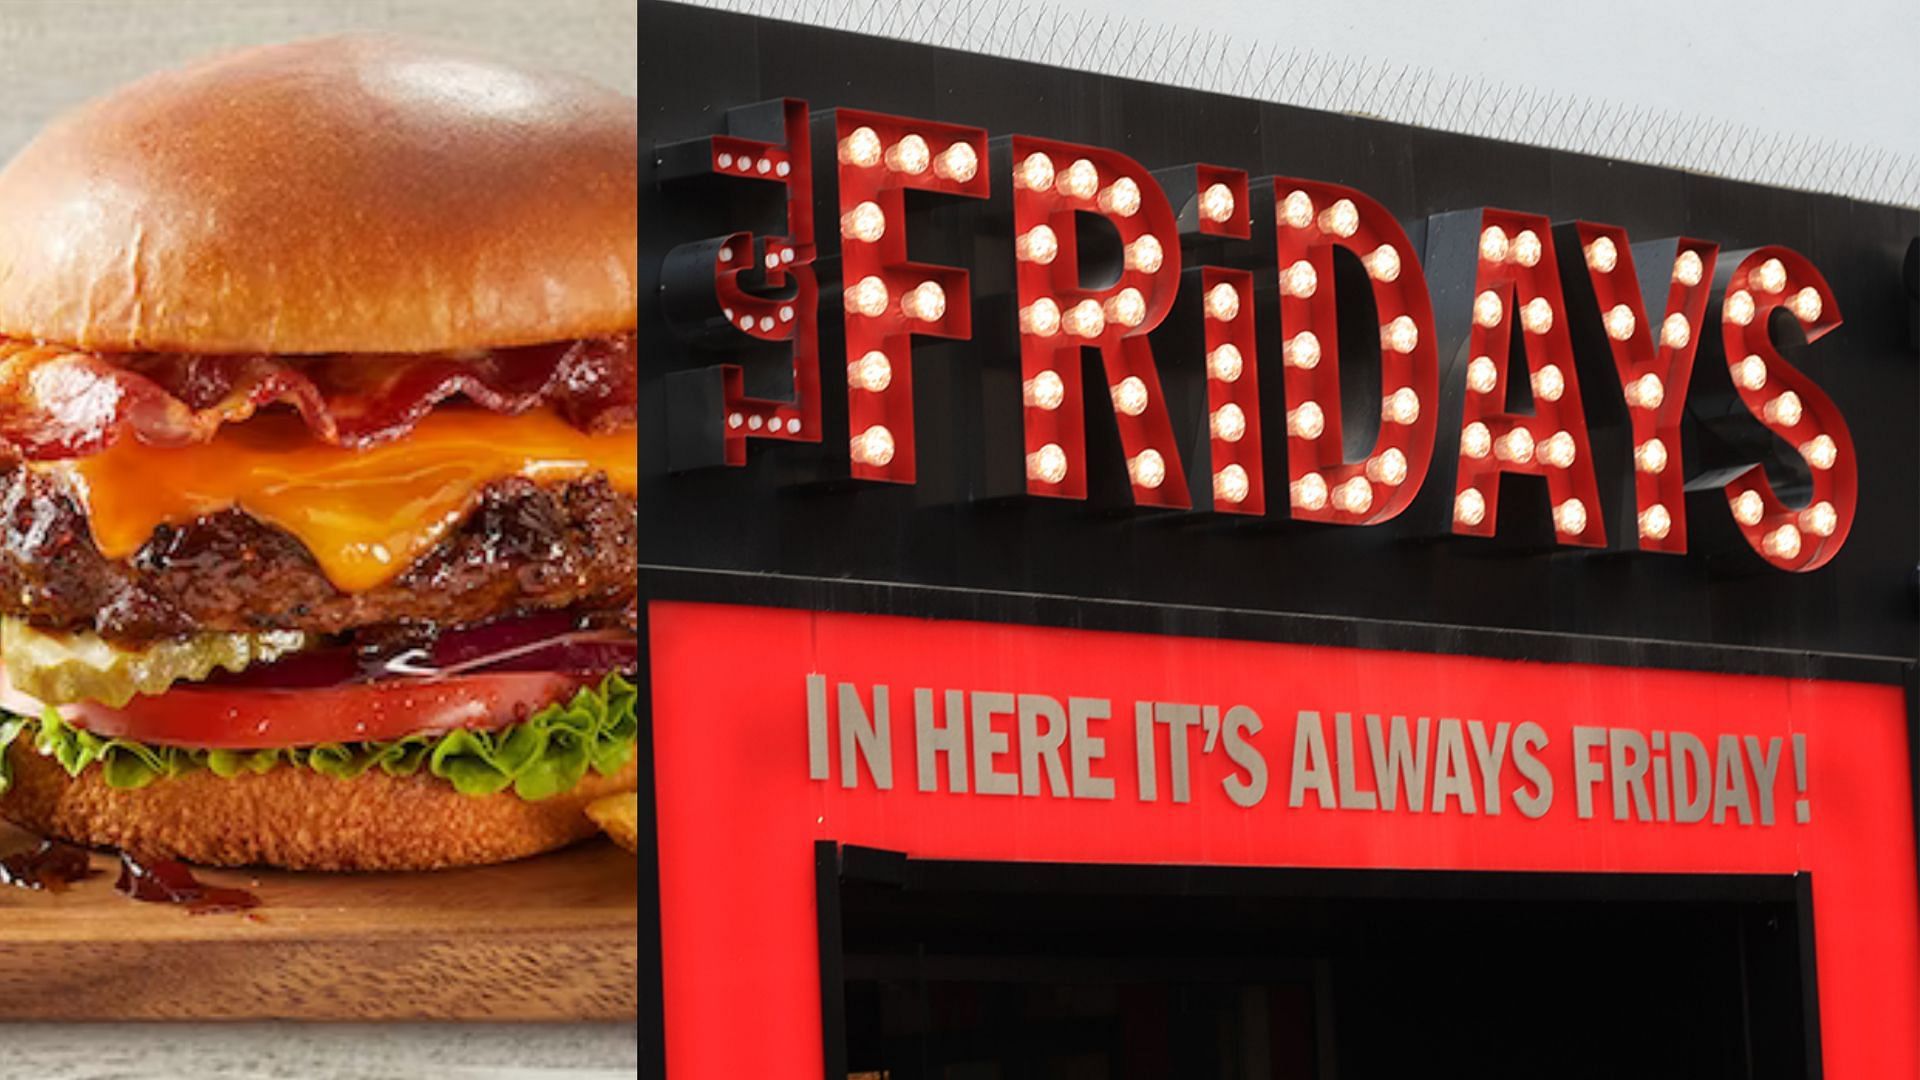 All TGI Fridays deals you can avail in the 2022 Holiday season